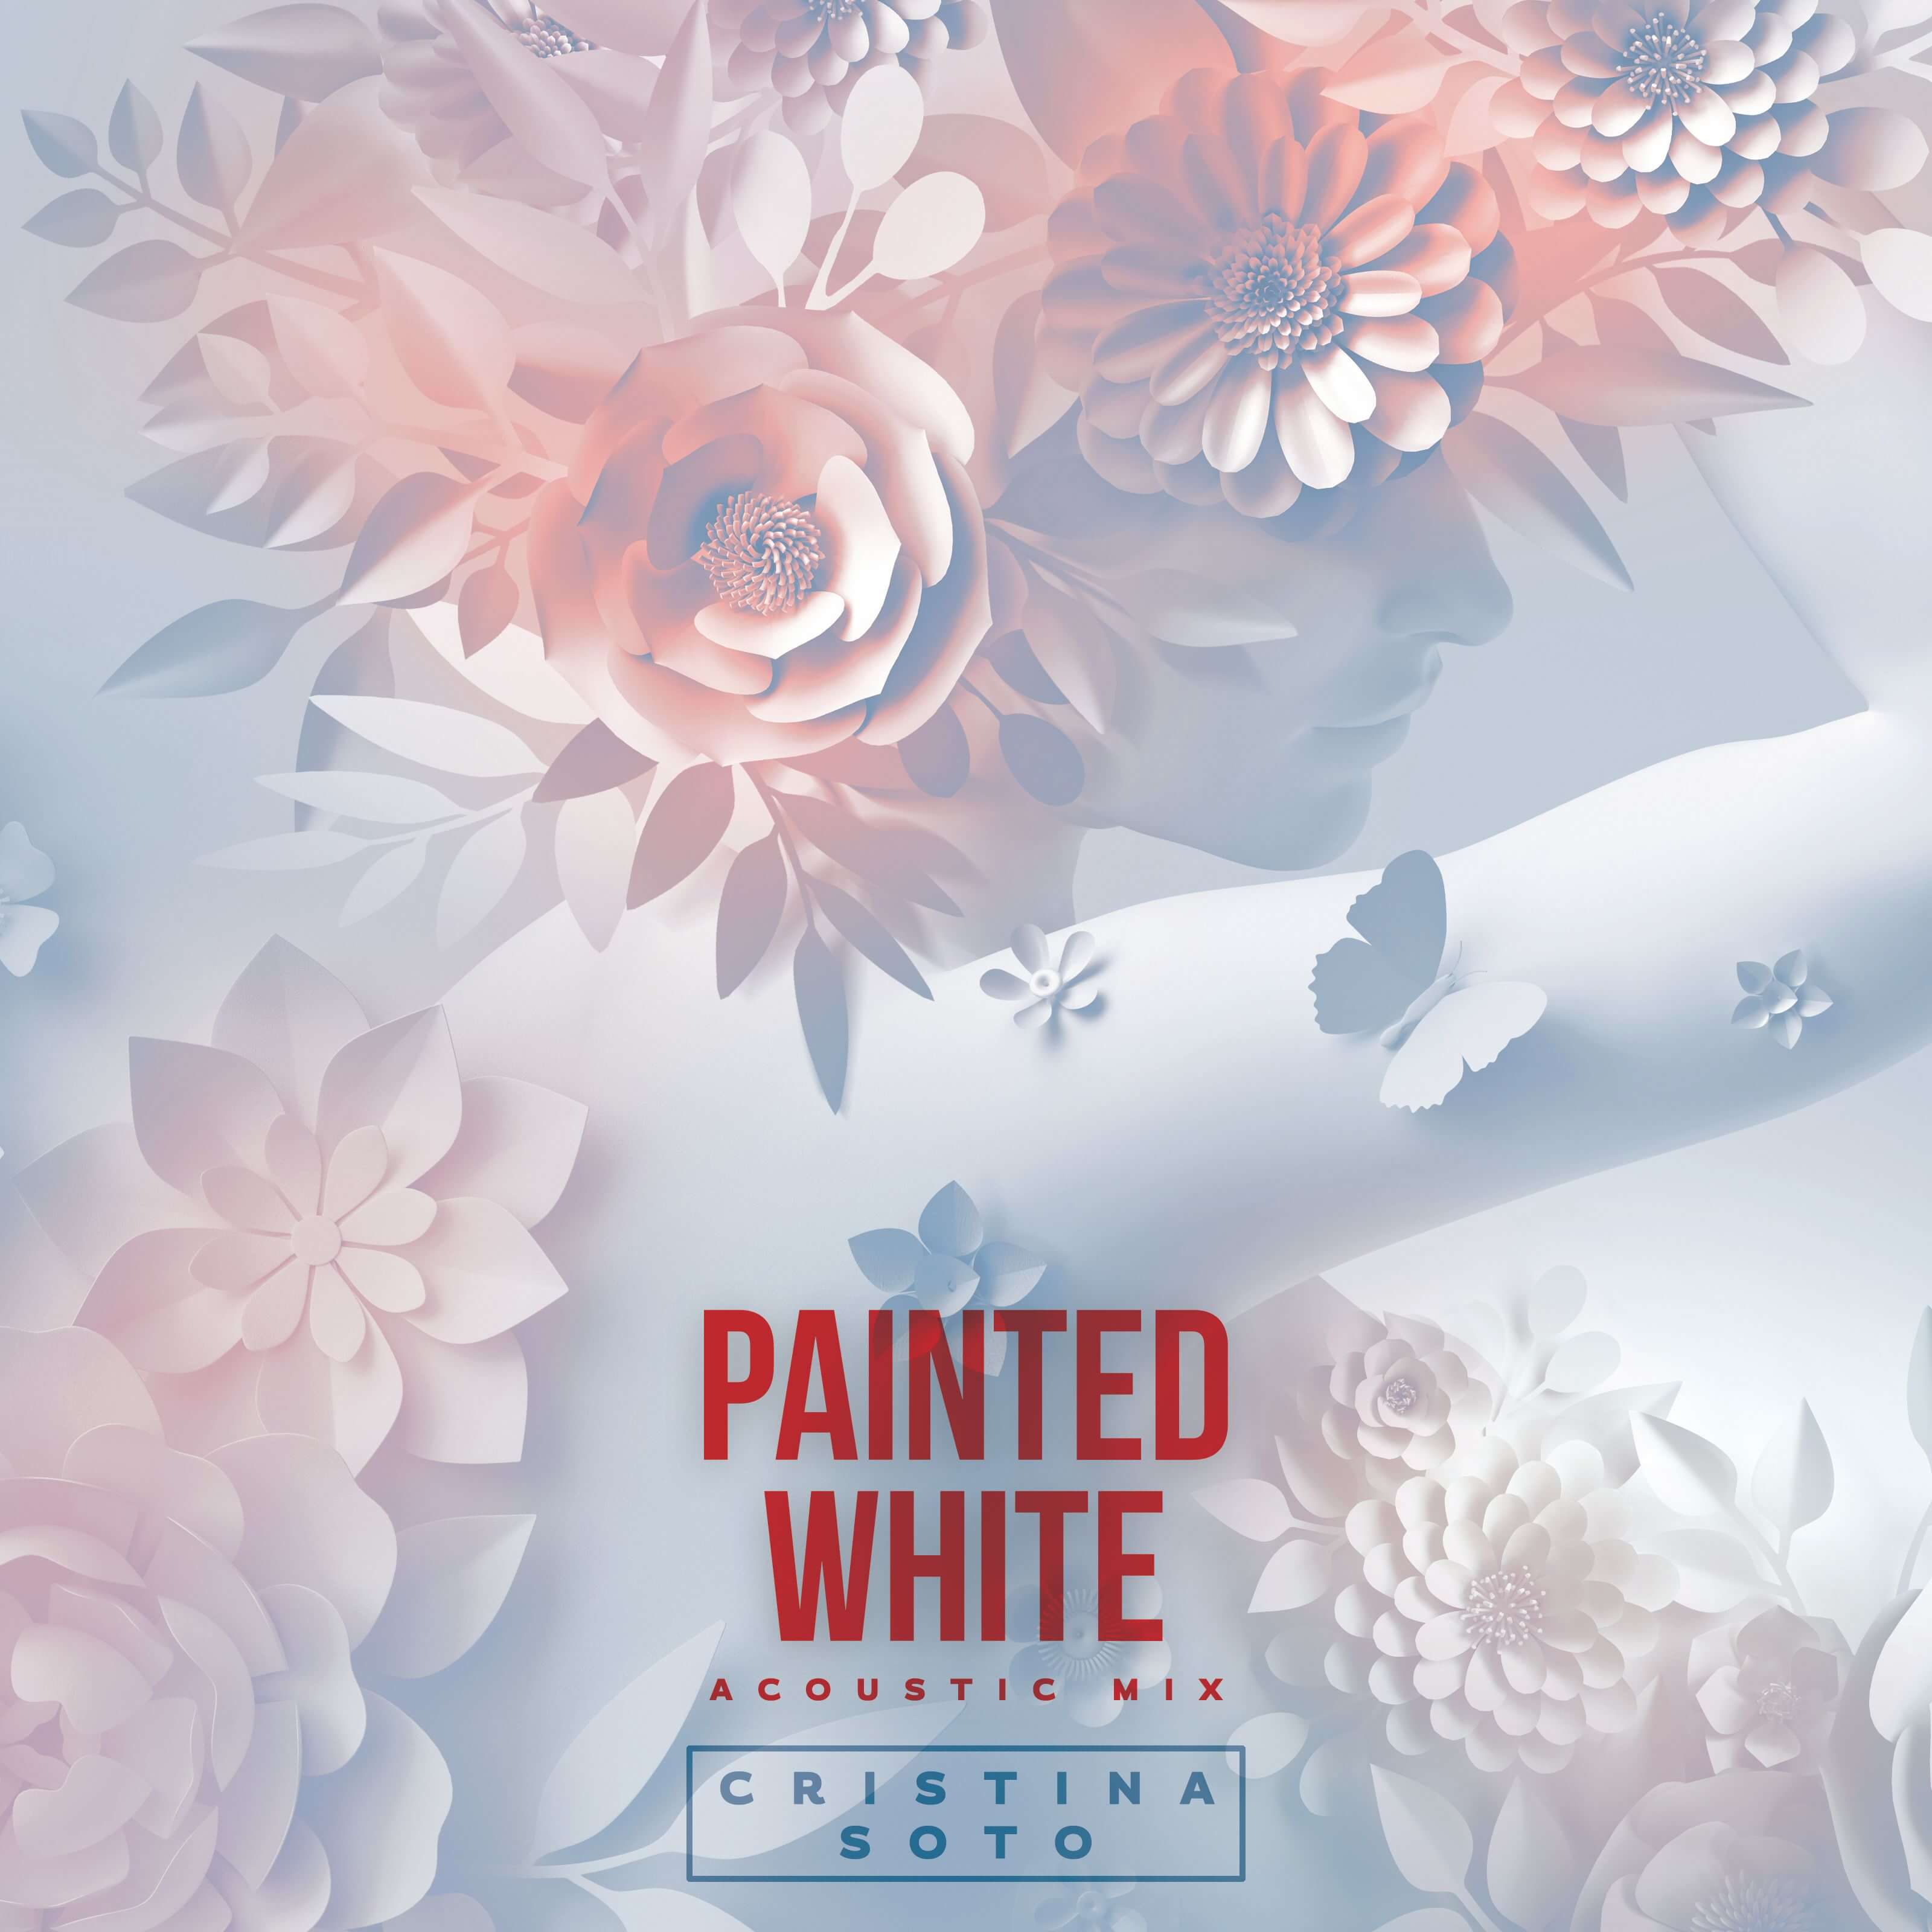 Cristina Soto’s ‘Painted White’ Is An Acoustic Lovers Heaven